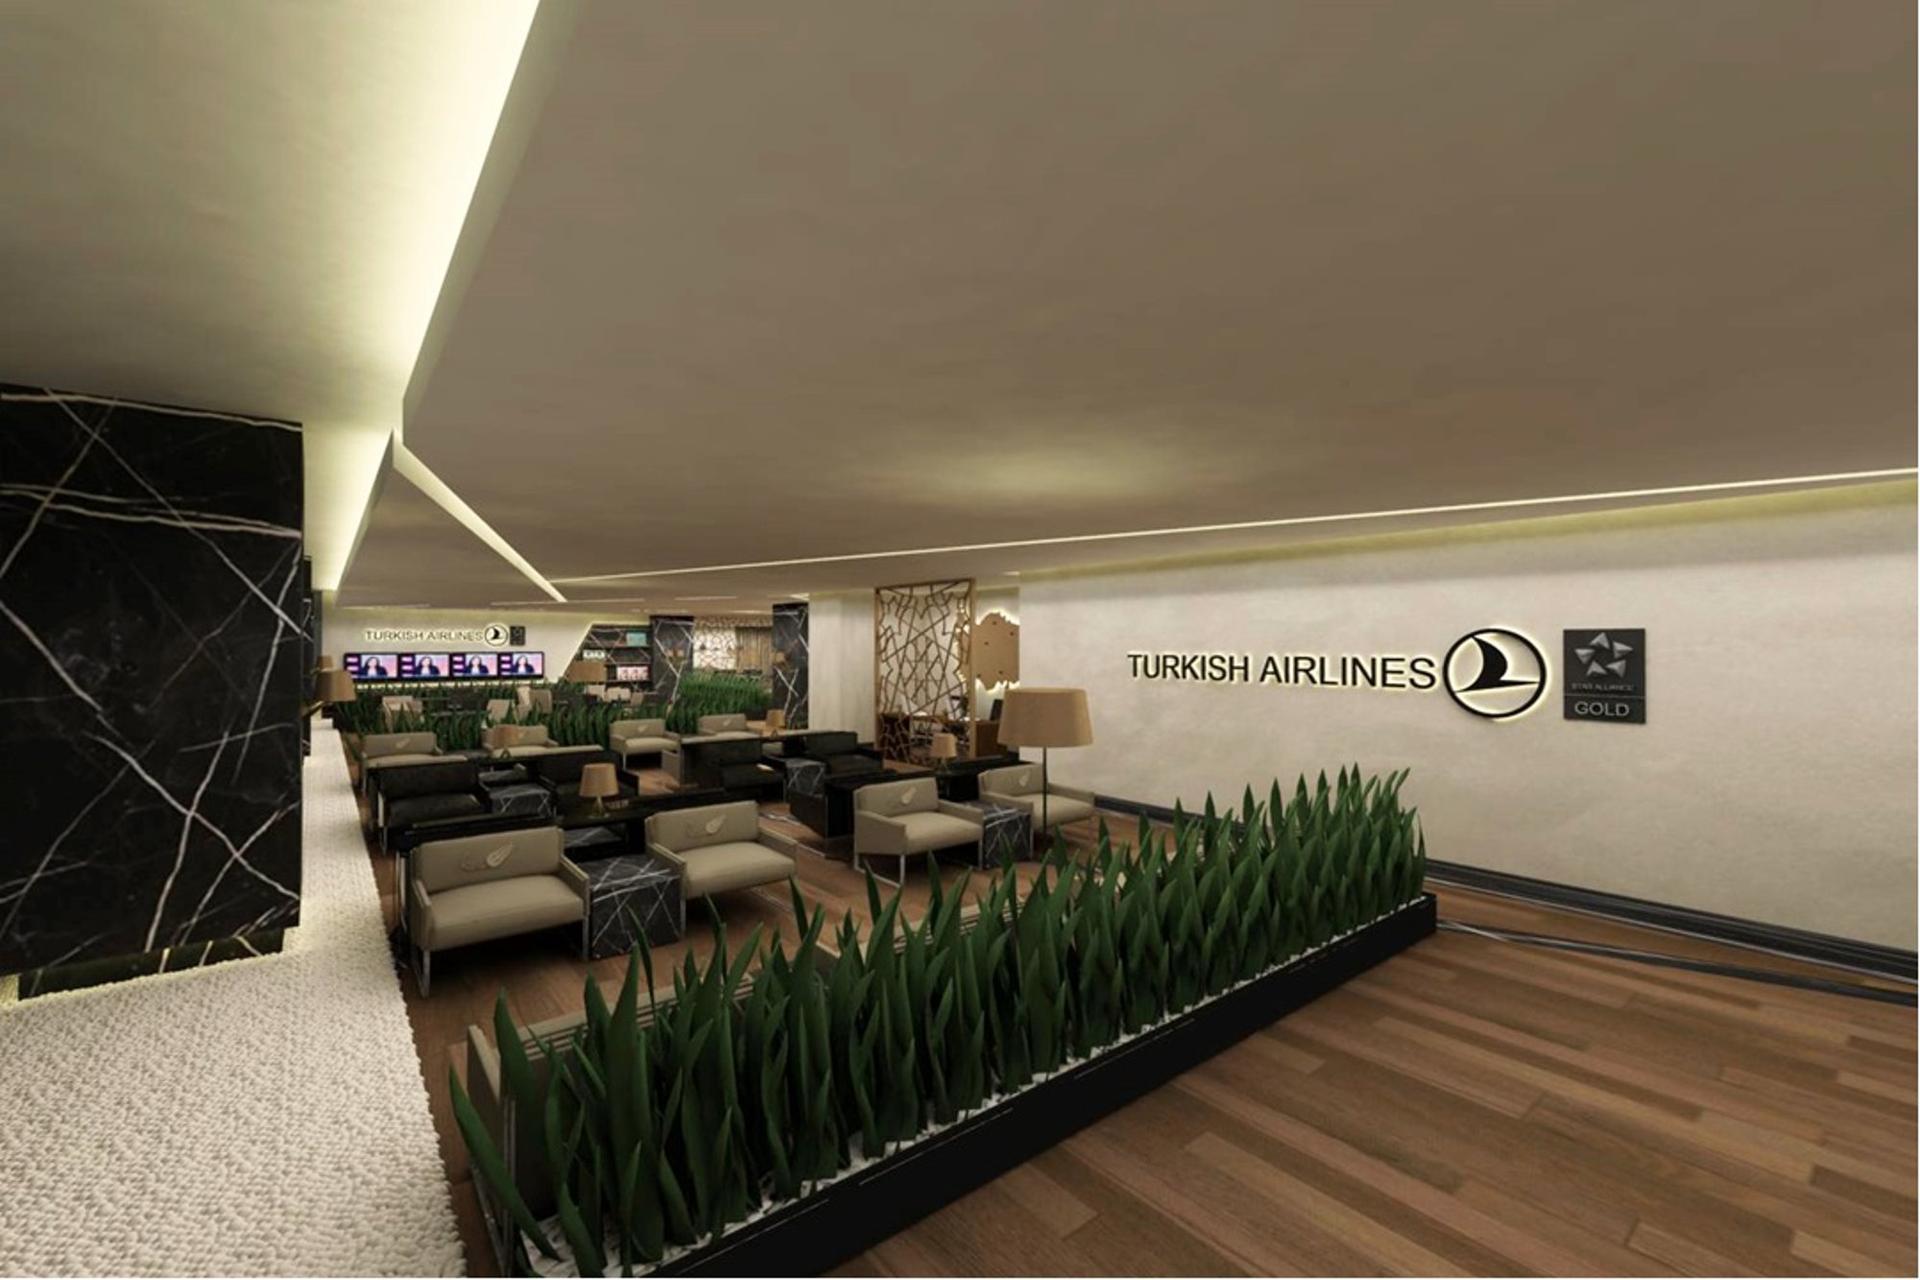 Turkish Airlines CIP Lounge (Business Lounge) image 4 of 27